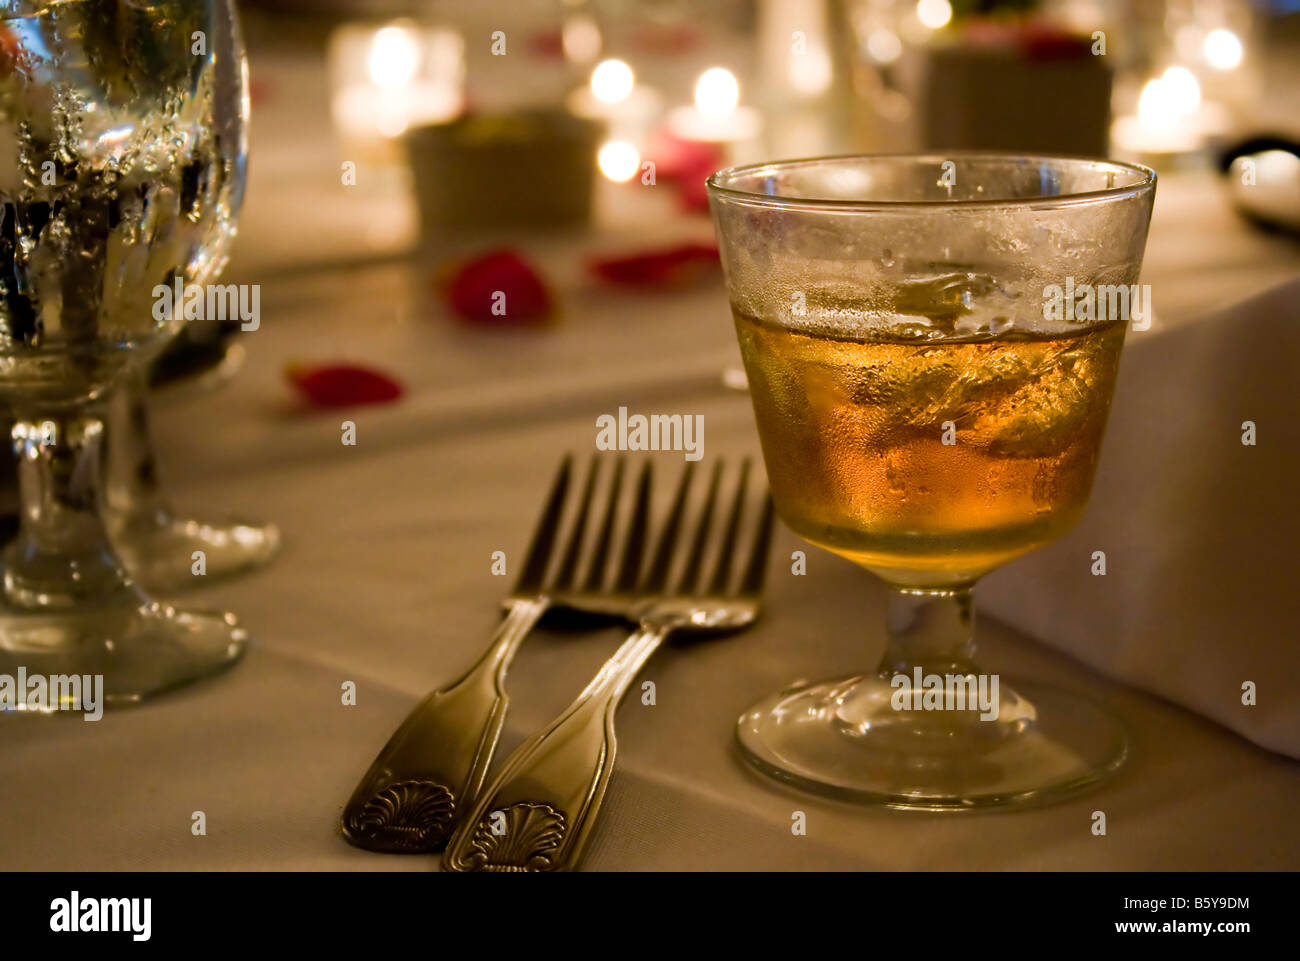 A glass of golden hard liquor on the rocks Could be scotch bourbon or whiskey Stock Photo